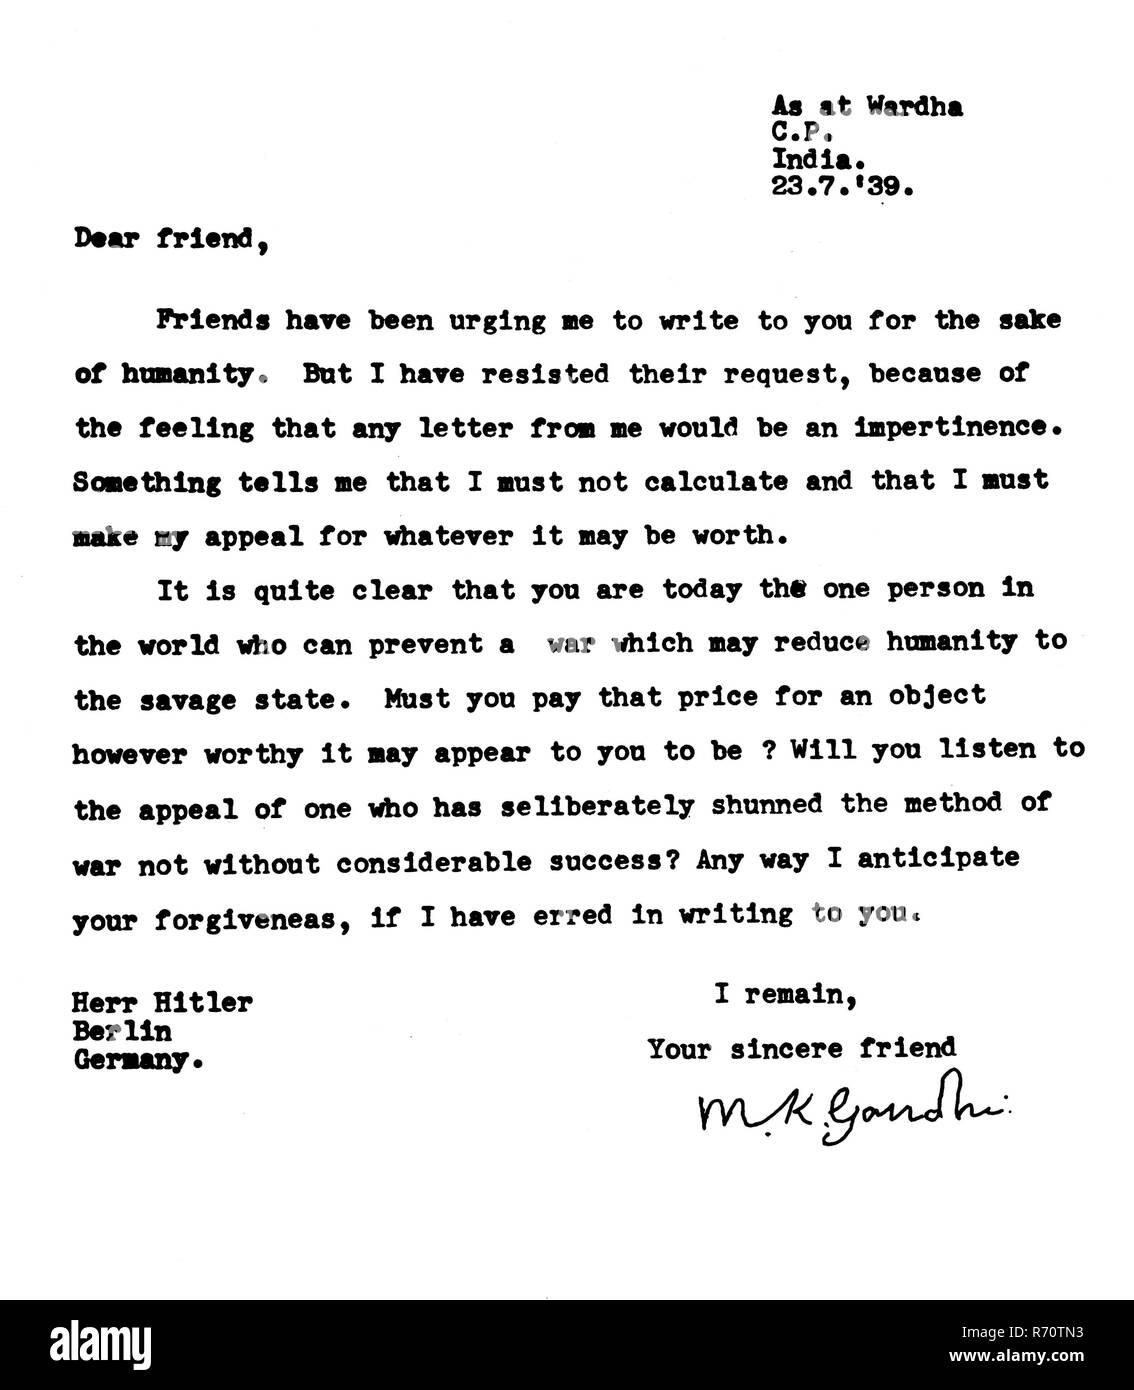 Mahatma Gandhi first letter to Herr Adolf Hitler, from Wardha, India to Berlin, Germany, July 23, 1939, old vintage 1900s picture Stock Photo